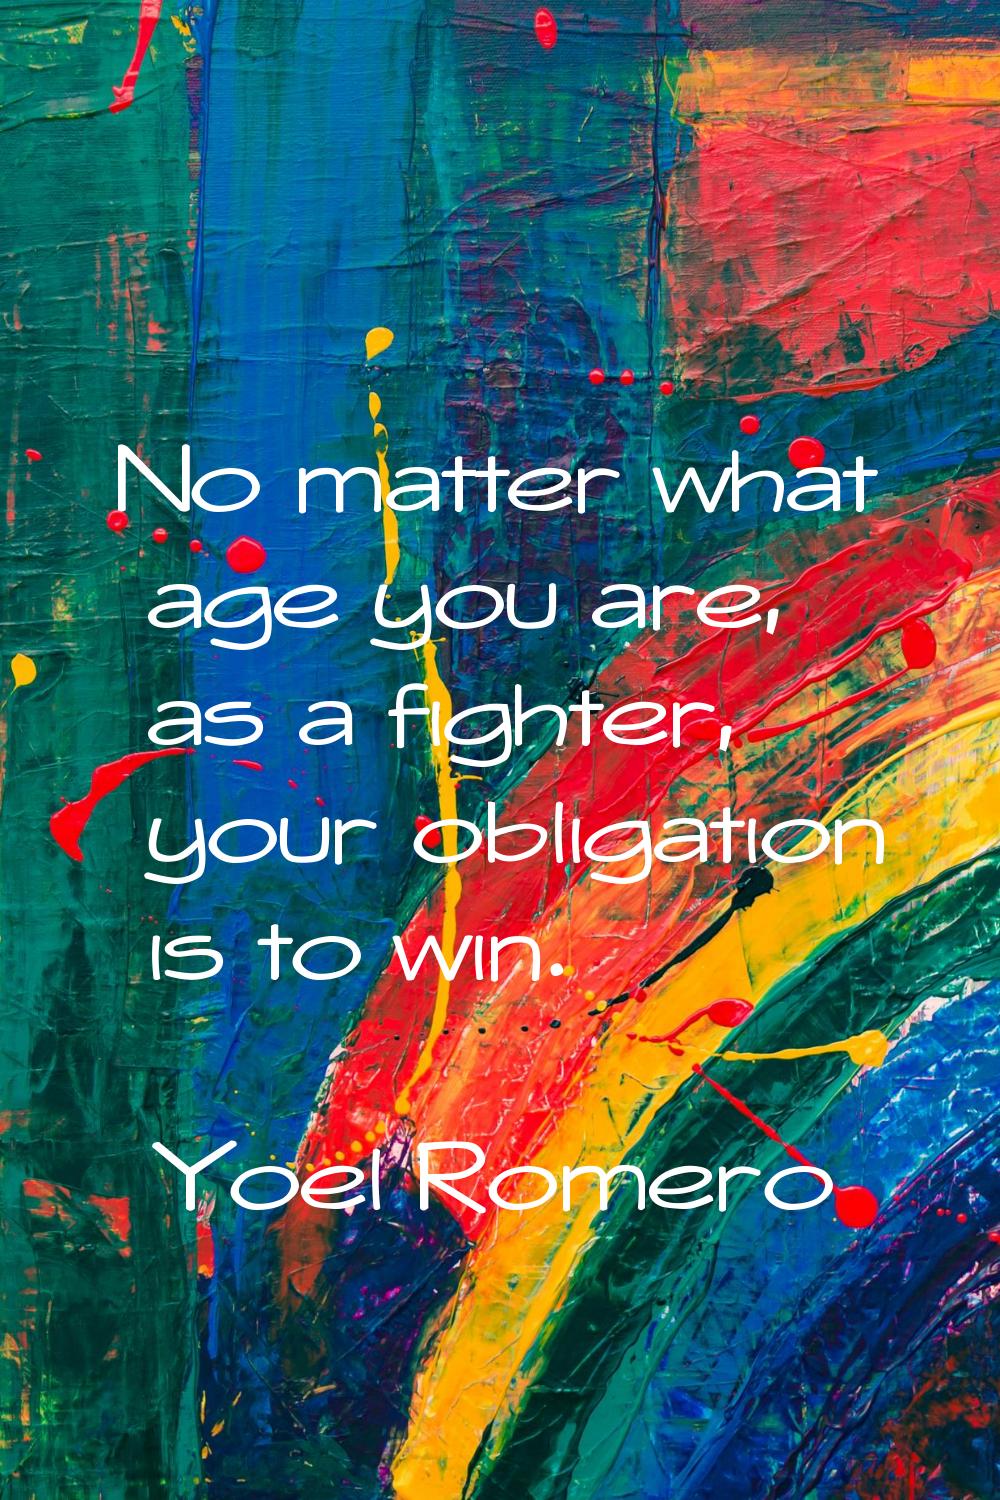 No matter what age you are, as a fighter, your obligation is to win.